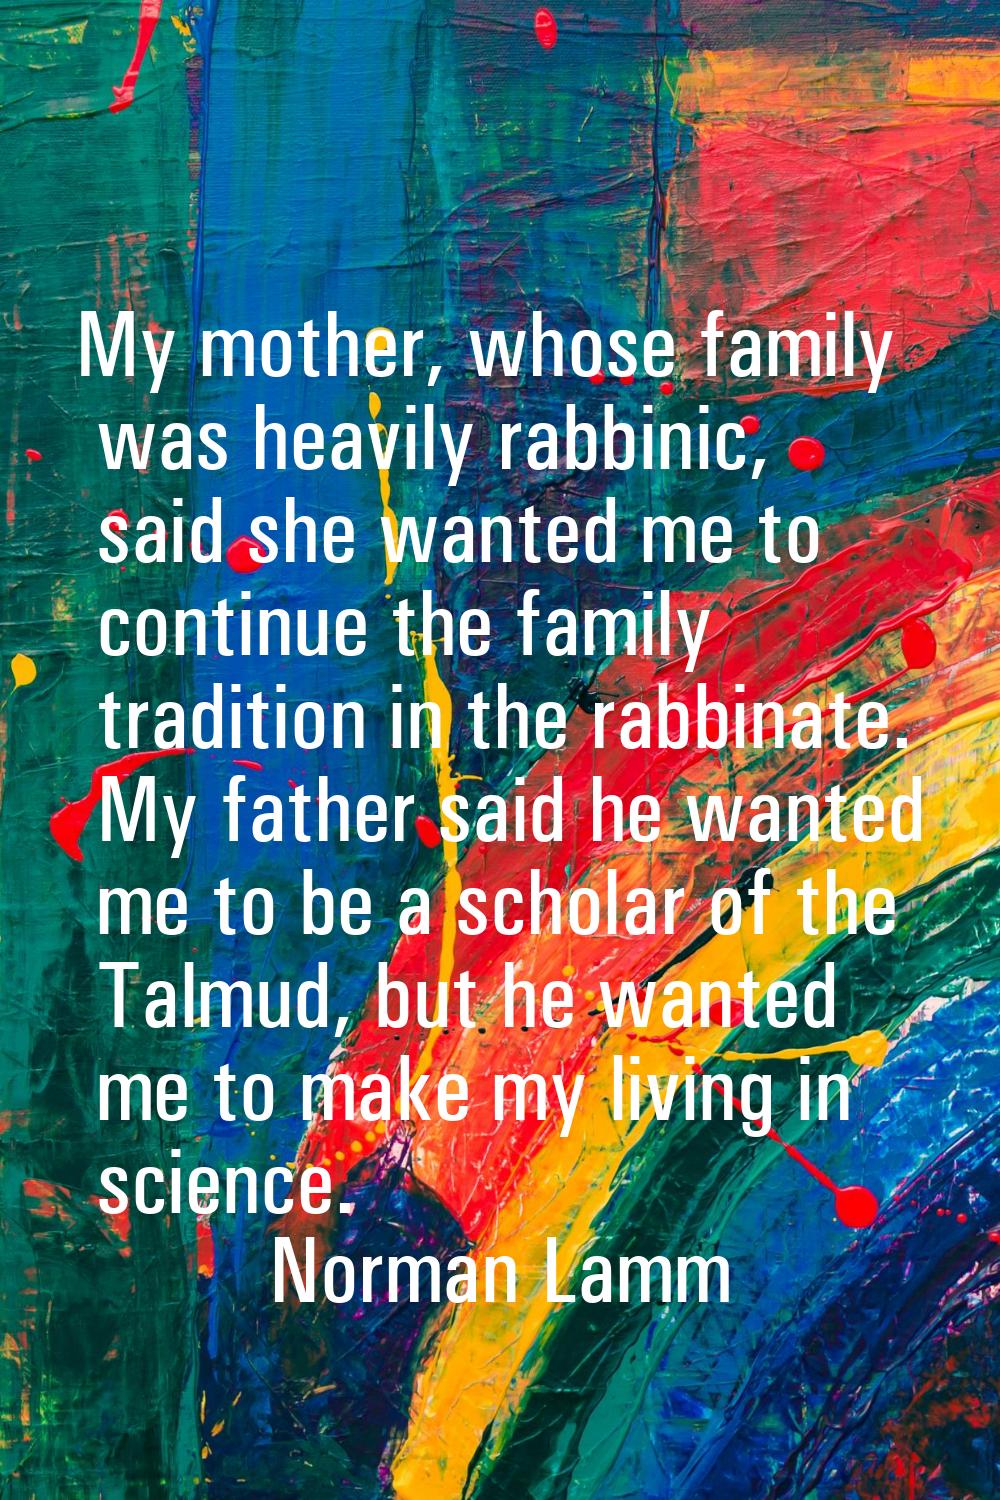 My mother, whose family was heavily rabbinic, said she wanted me to continue the family tradition i